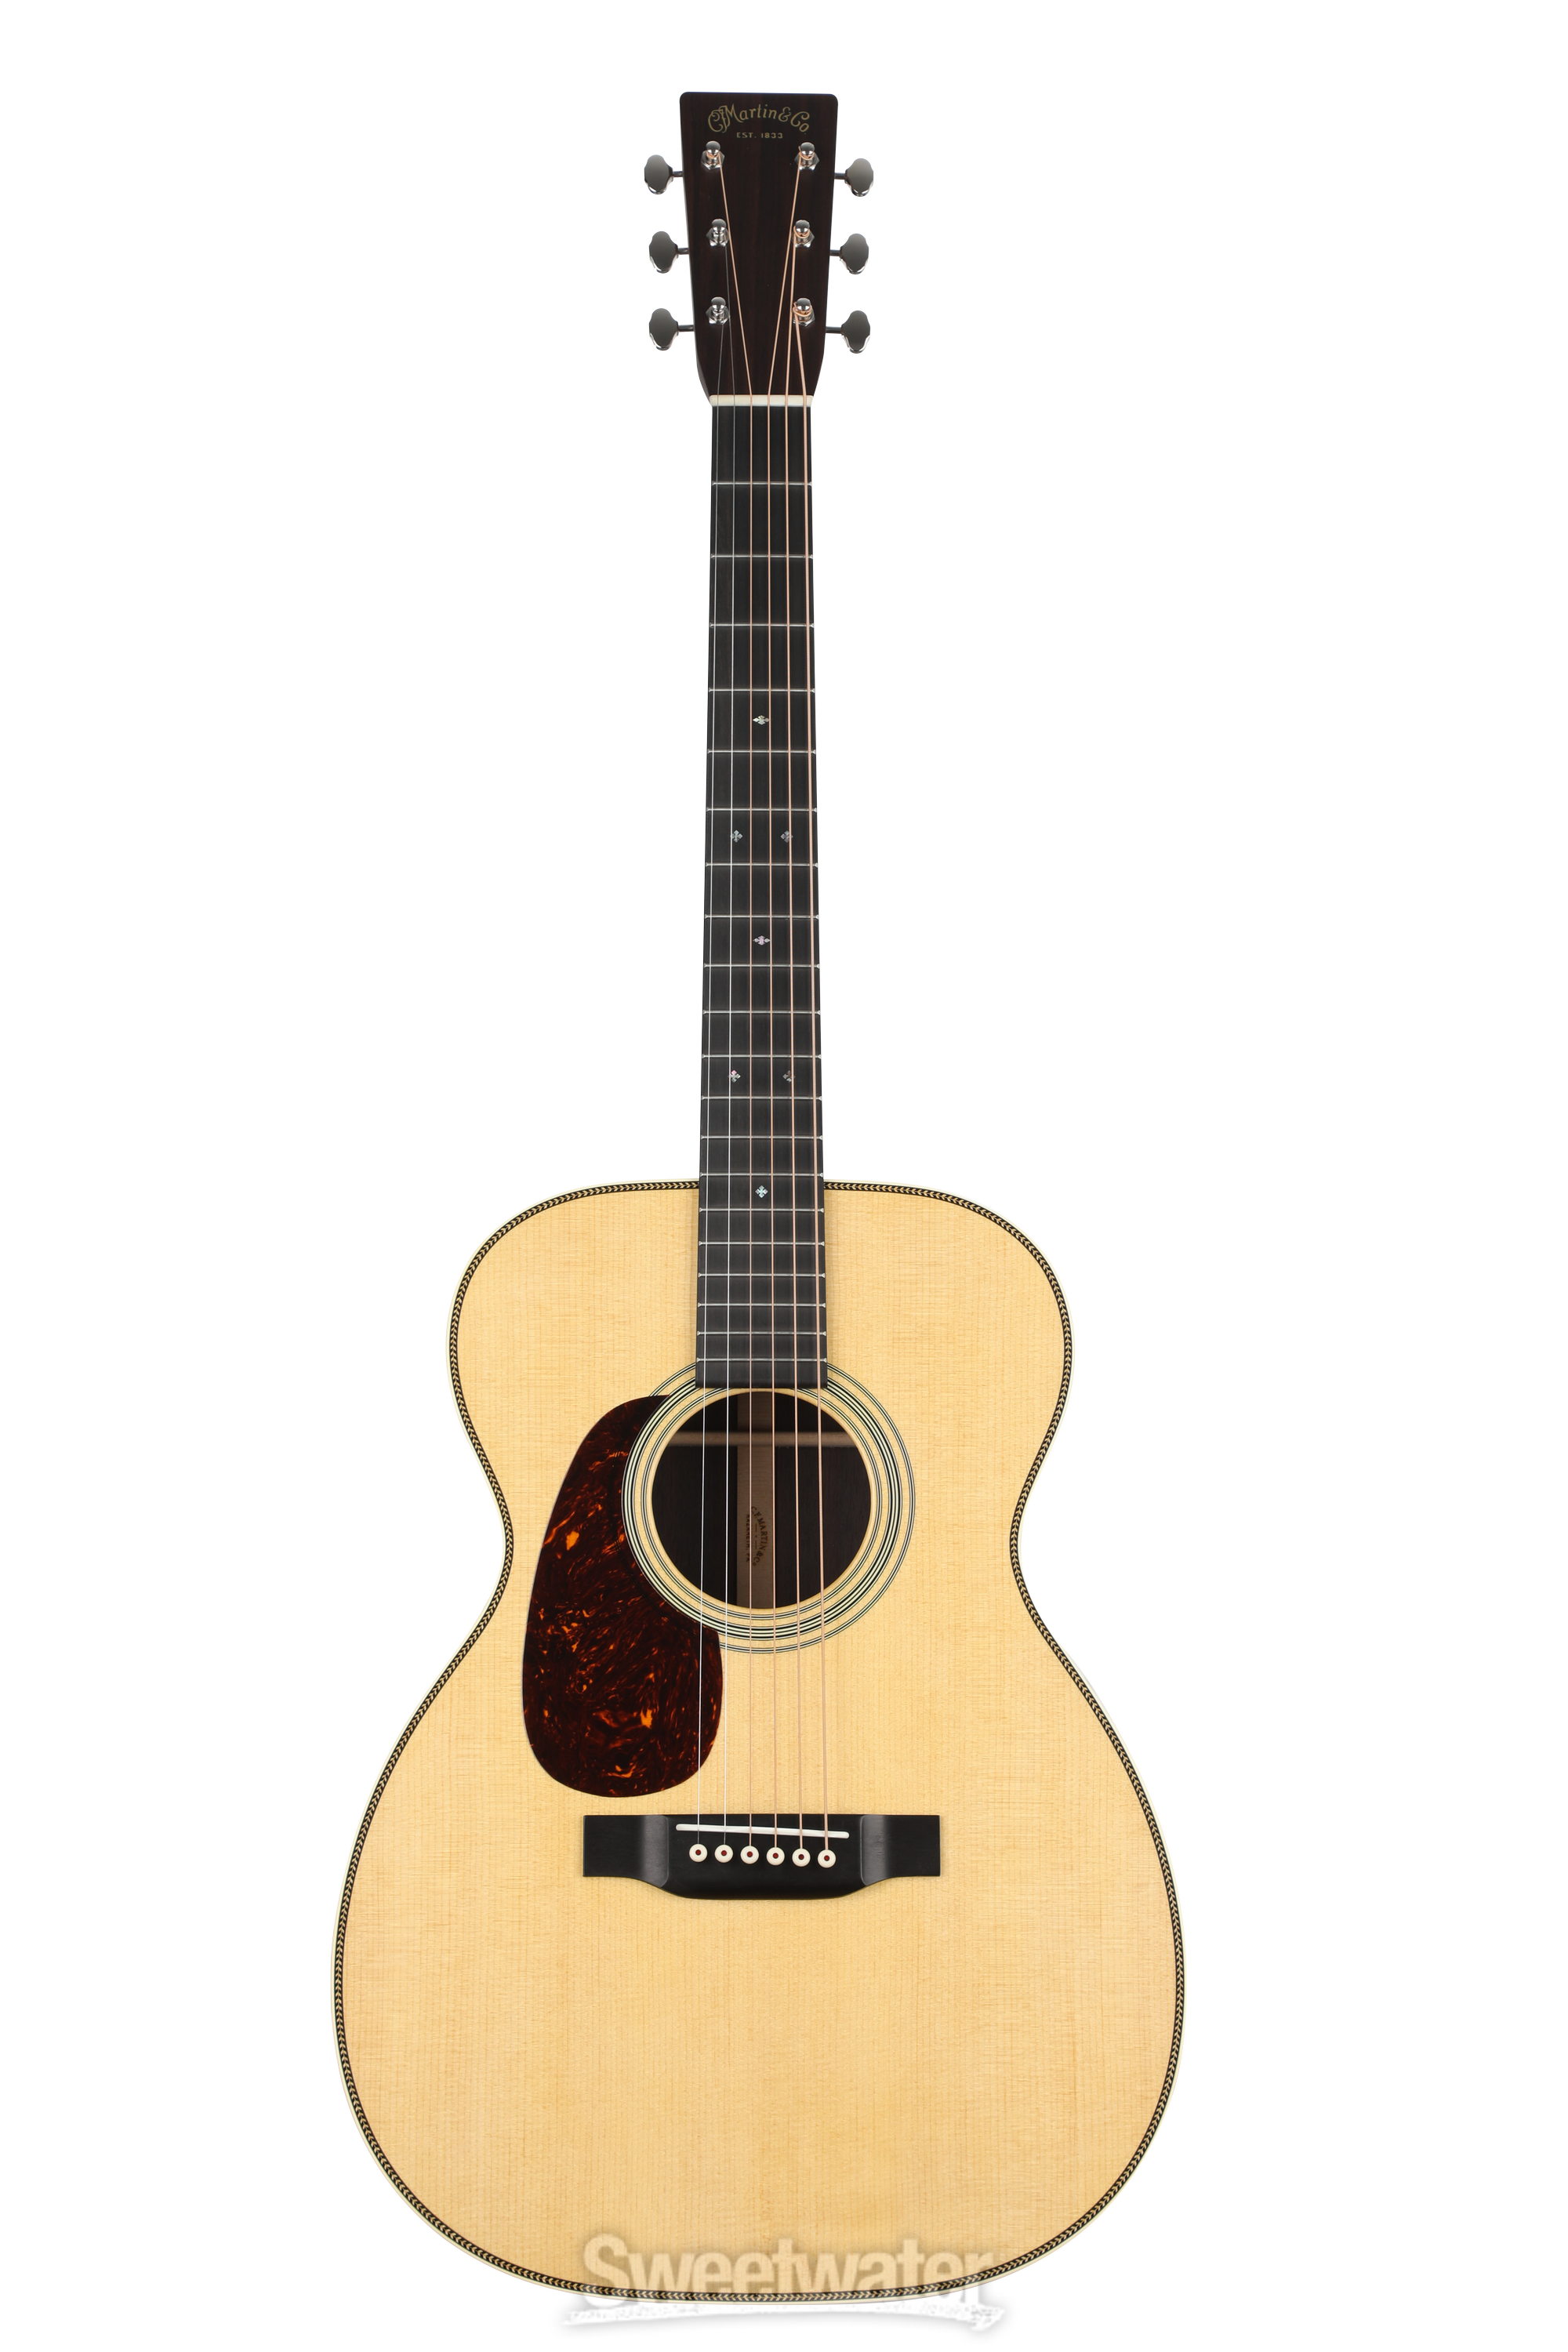 Martin 00-28 Left-Handed Acoustic Guitar - Natural | Sweetwater